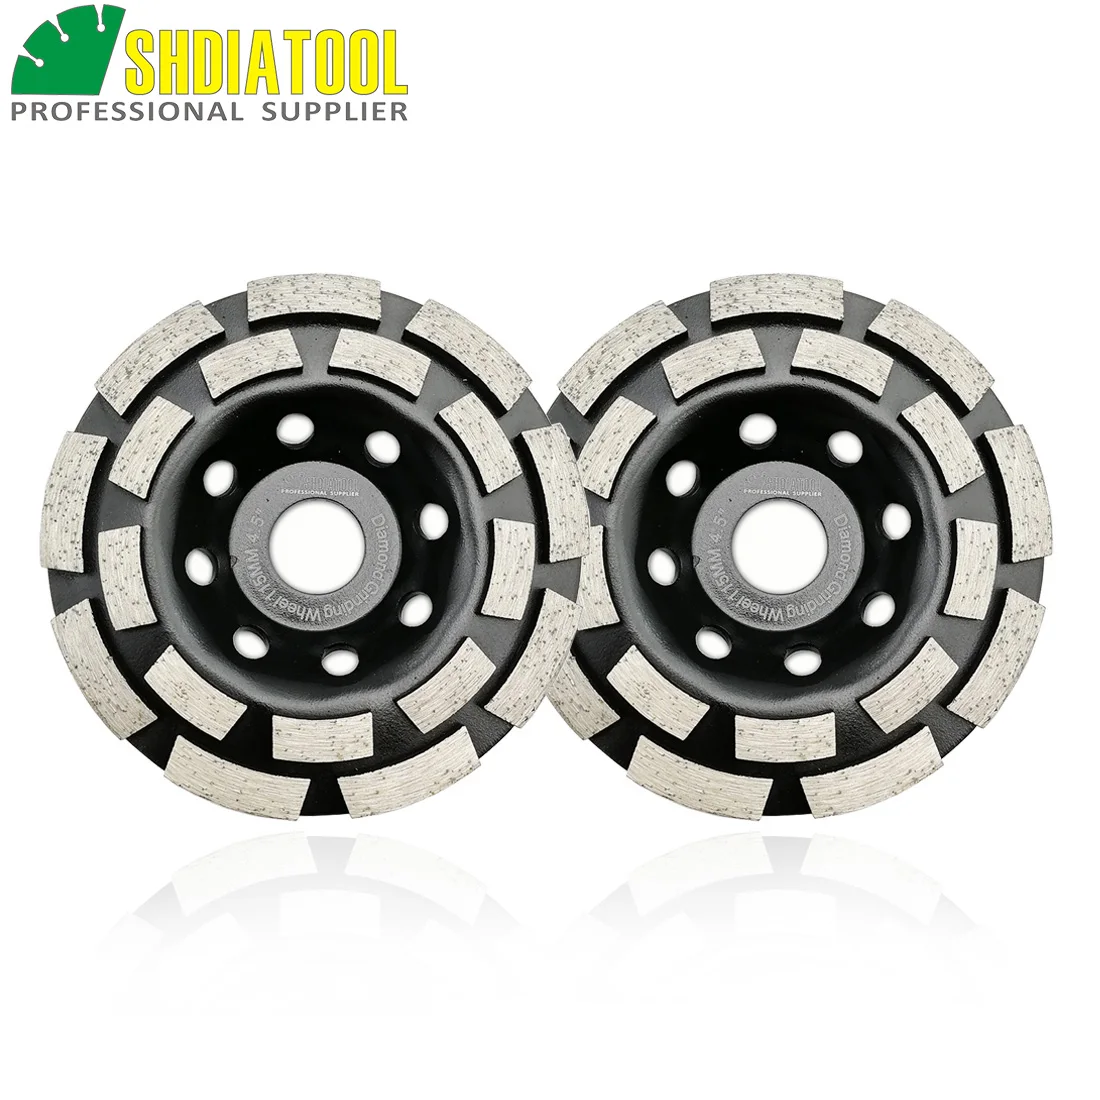 

SHDIATOOL 2pcs 4.5 inch Diamond Double Row Grinding Cup Wheel 115MM Grinding disc bore 20mm/16mm